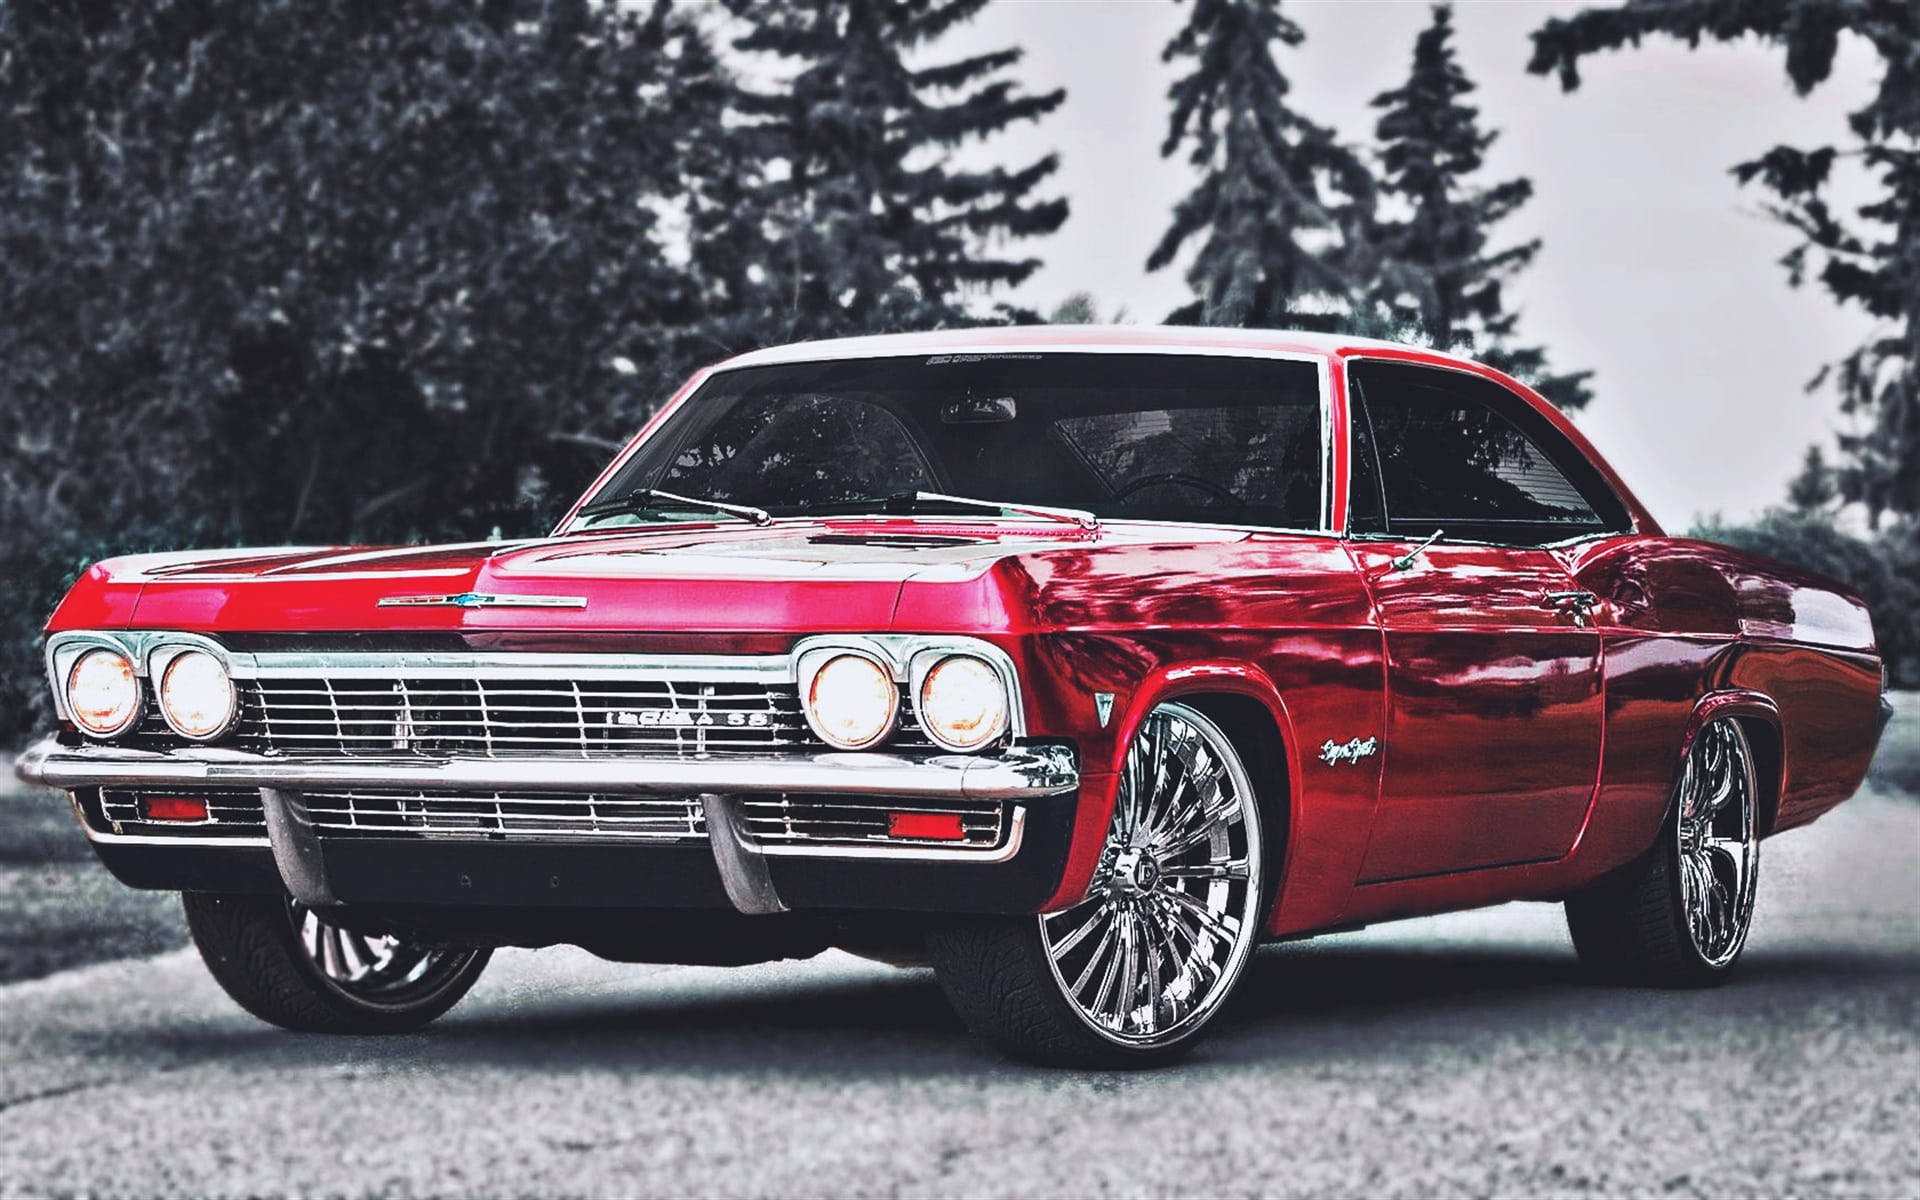 Classic Shine Of A 1967 Chevrolet Impala In Metallic Red Background